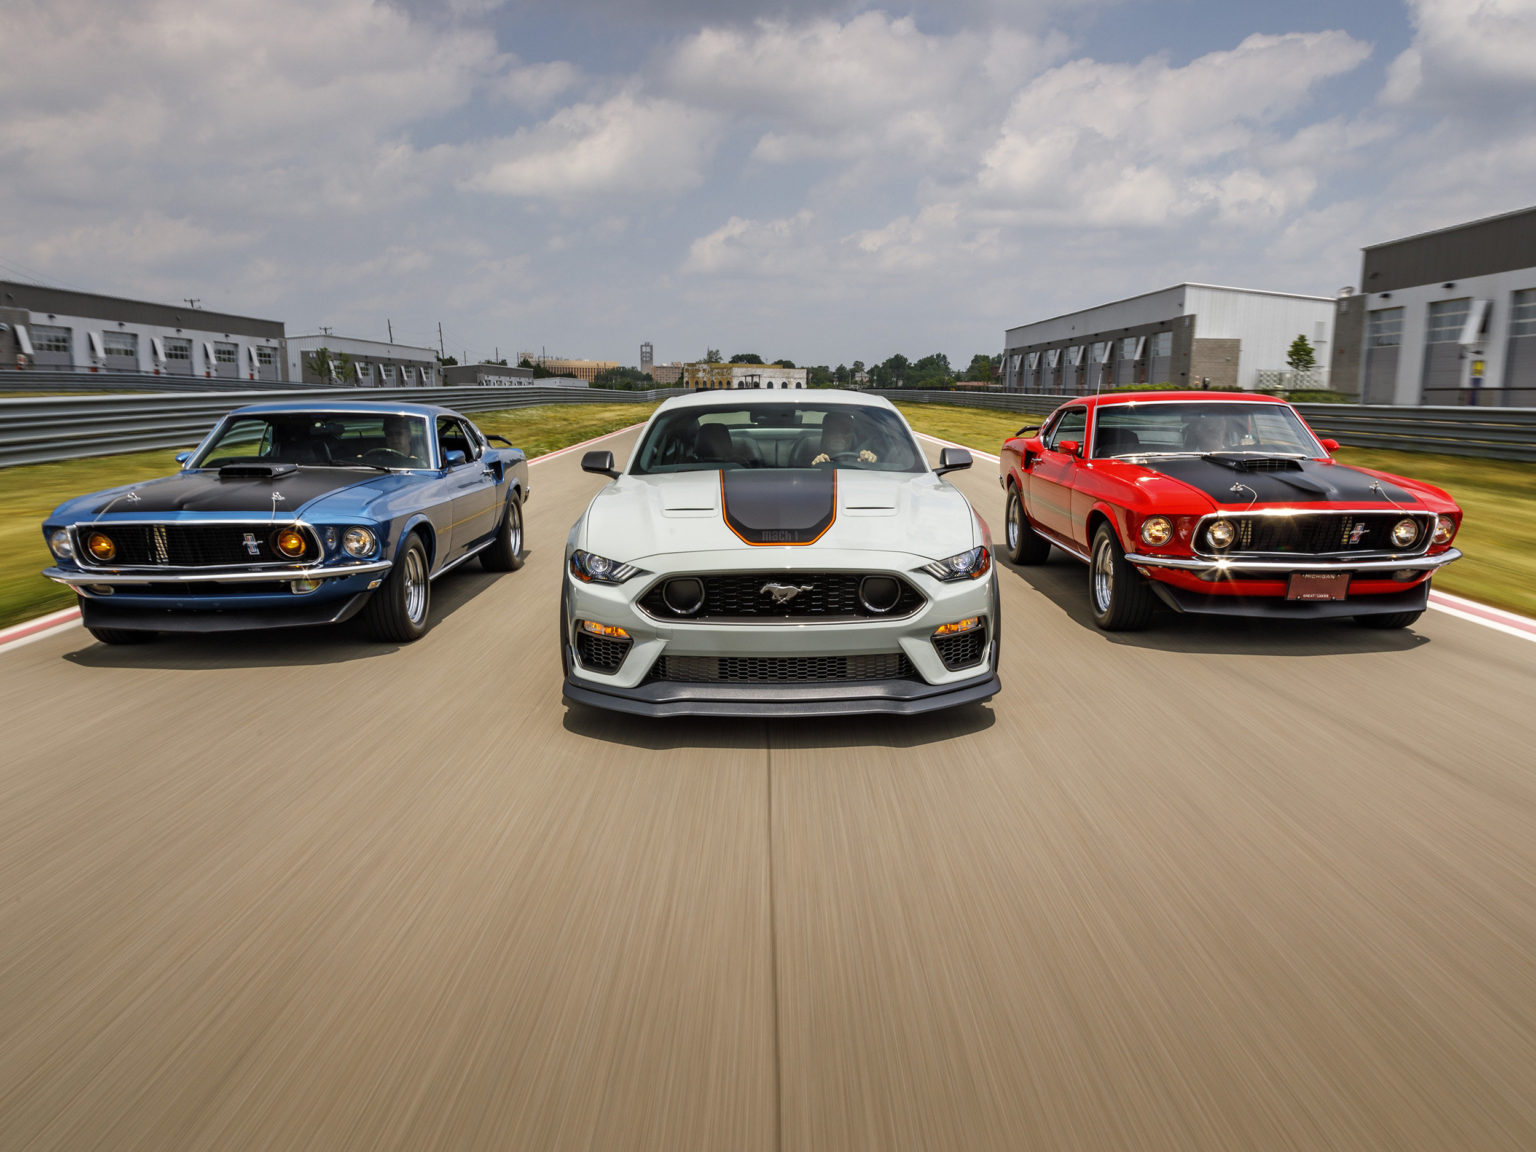 The new Ford Mustang Mach 1 brings the company's heritage into focus with more than a few touches of modernity.